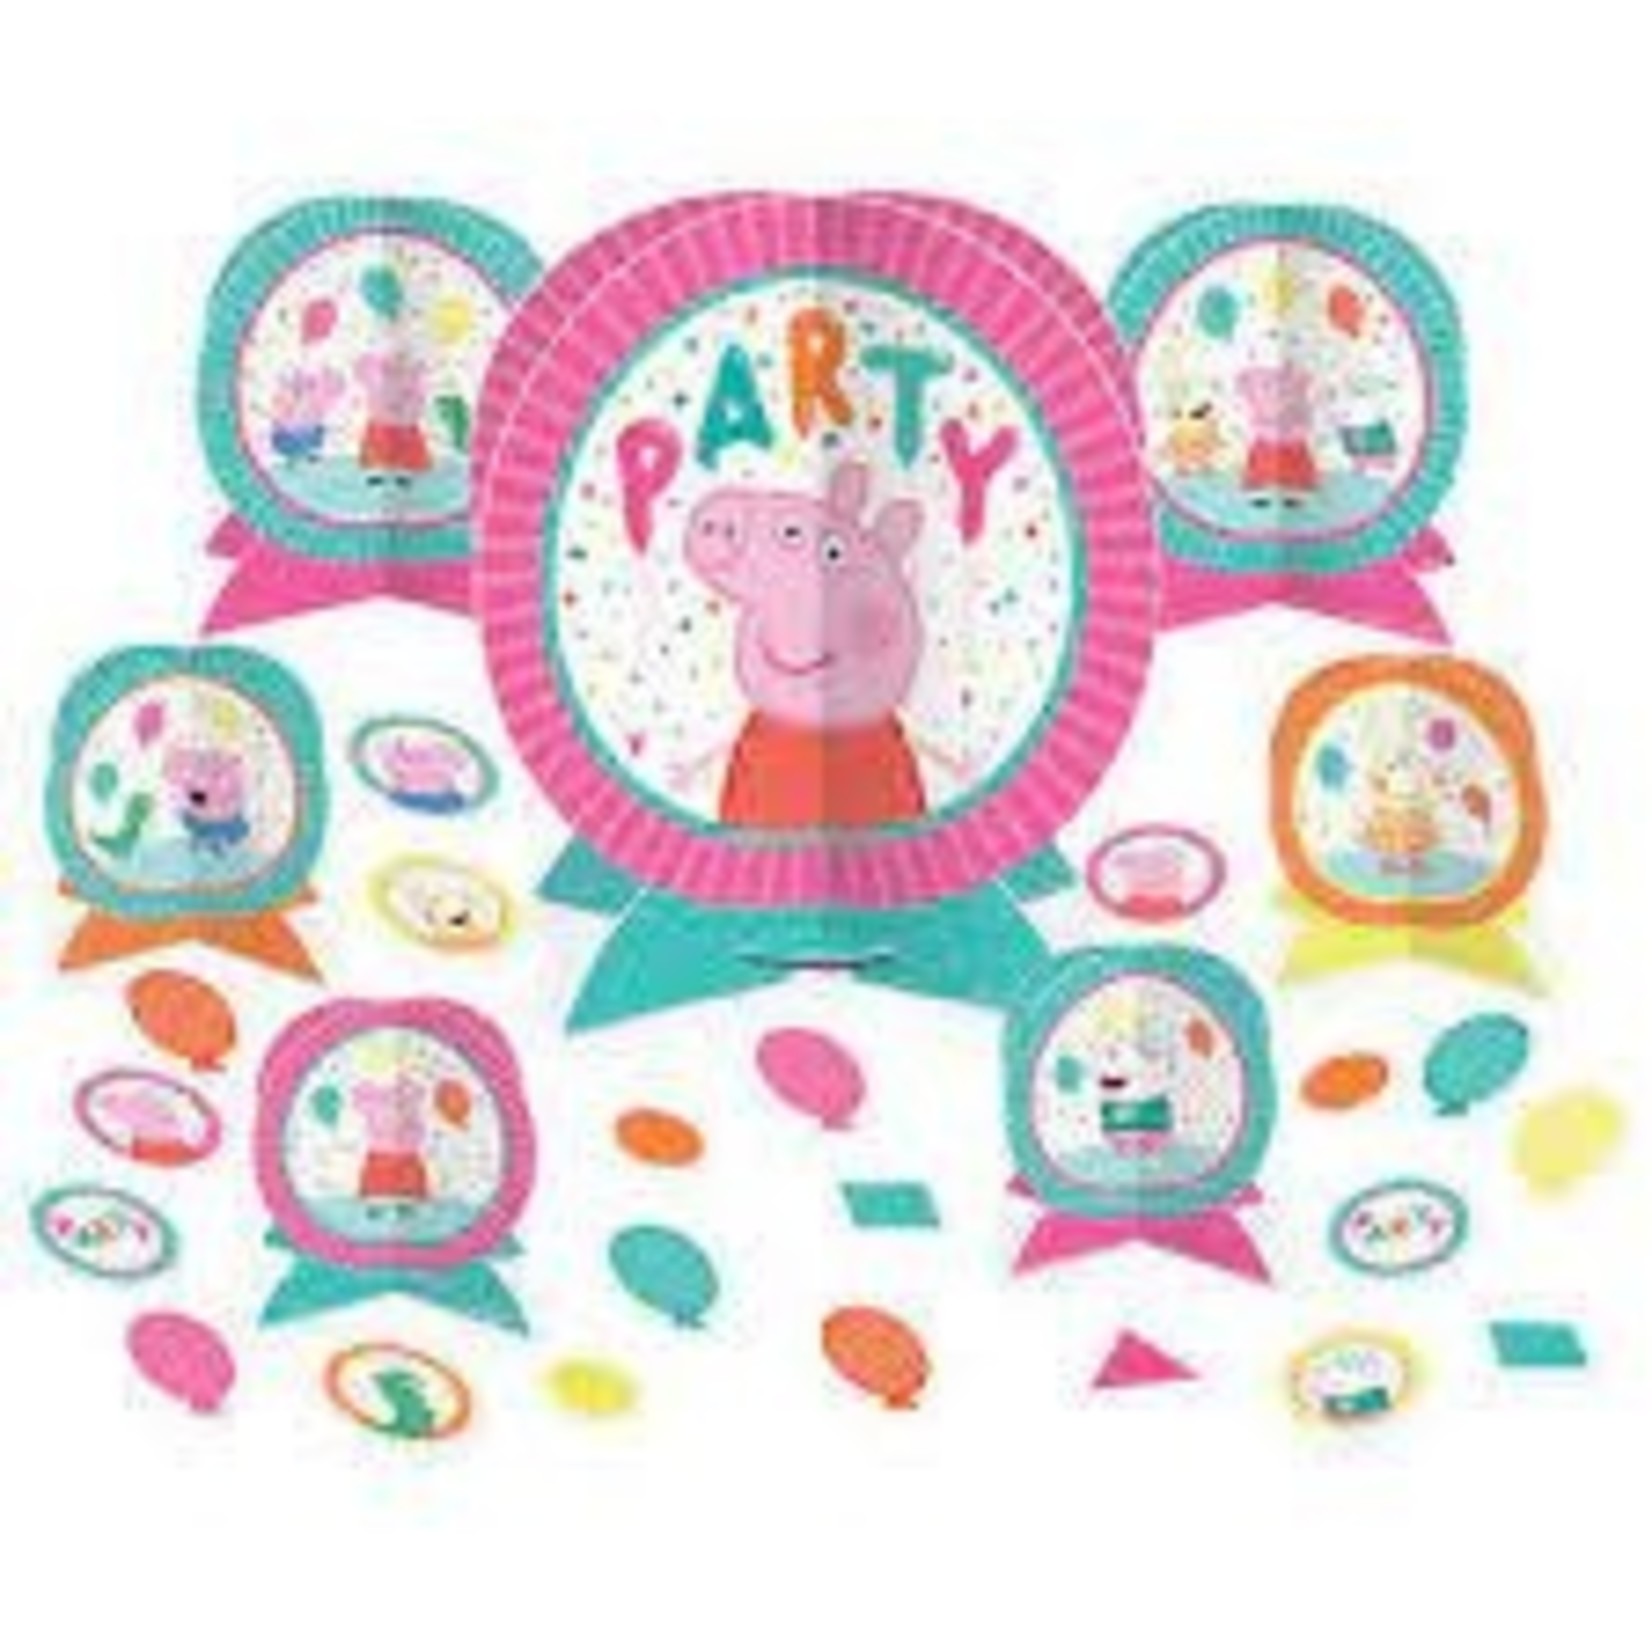 Peppa Pig Table Decorating